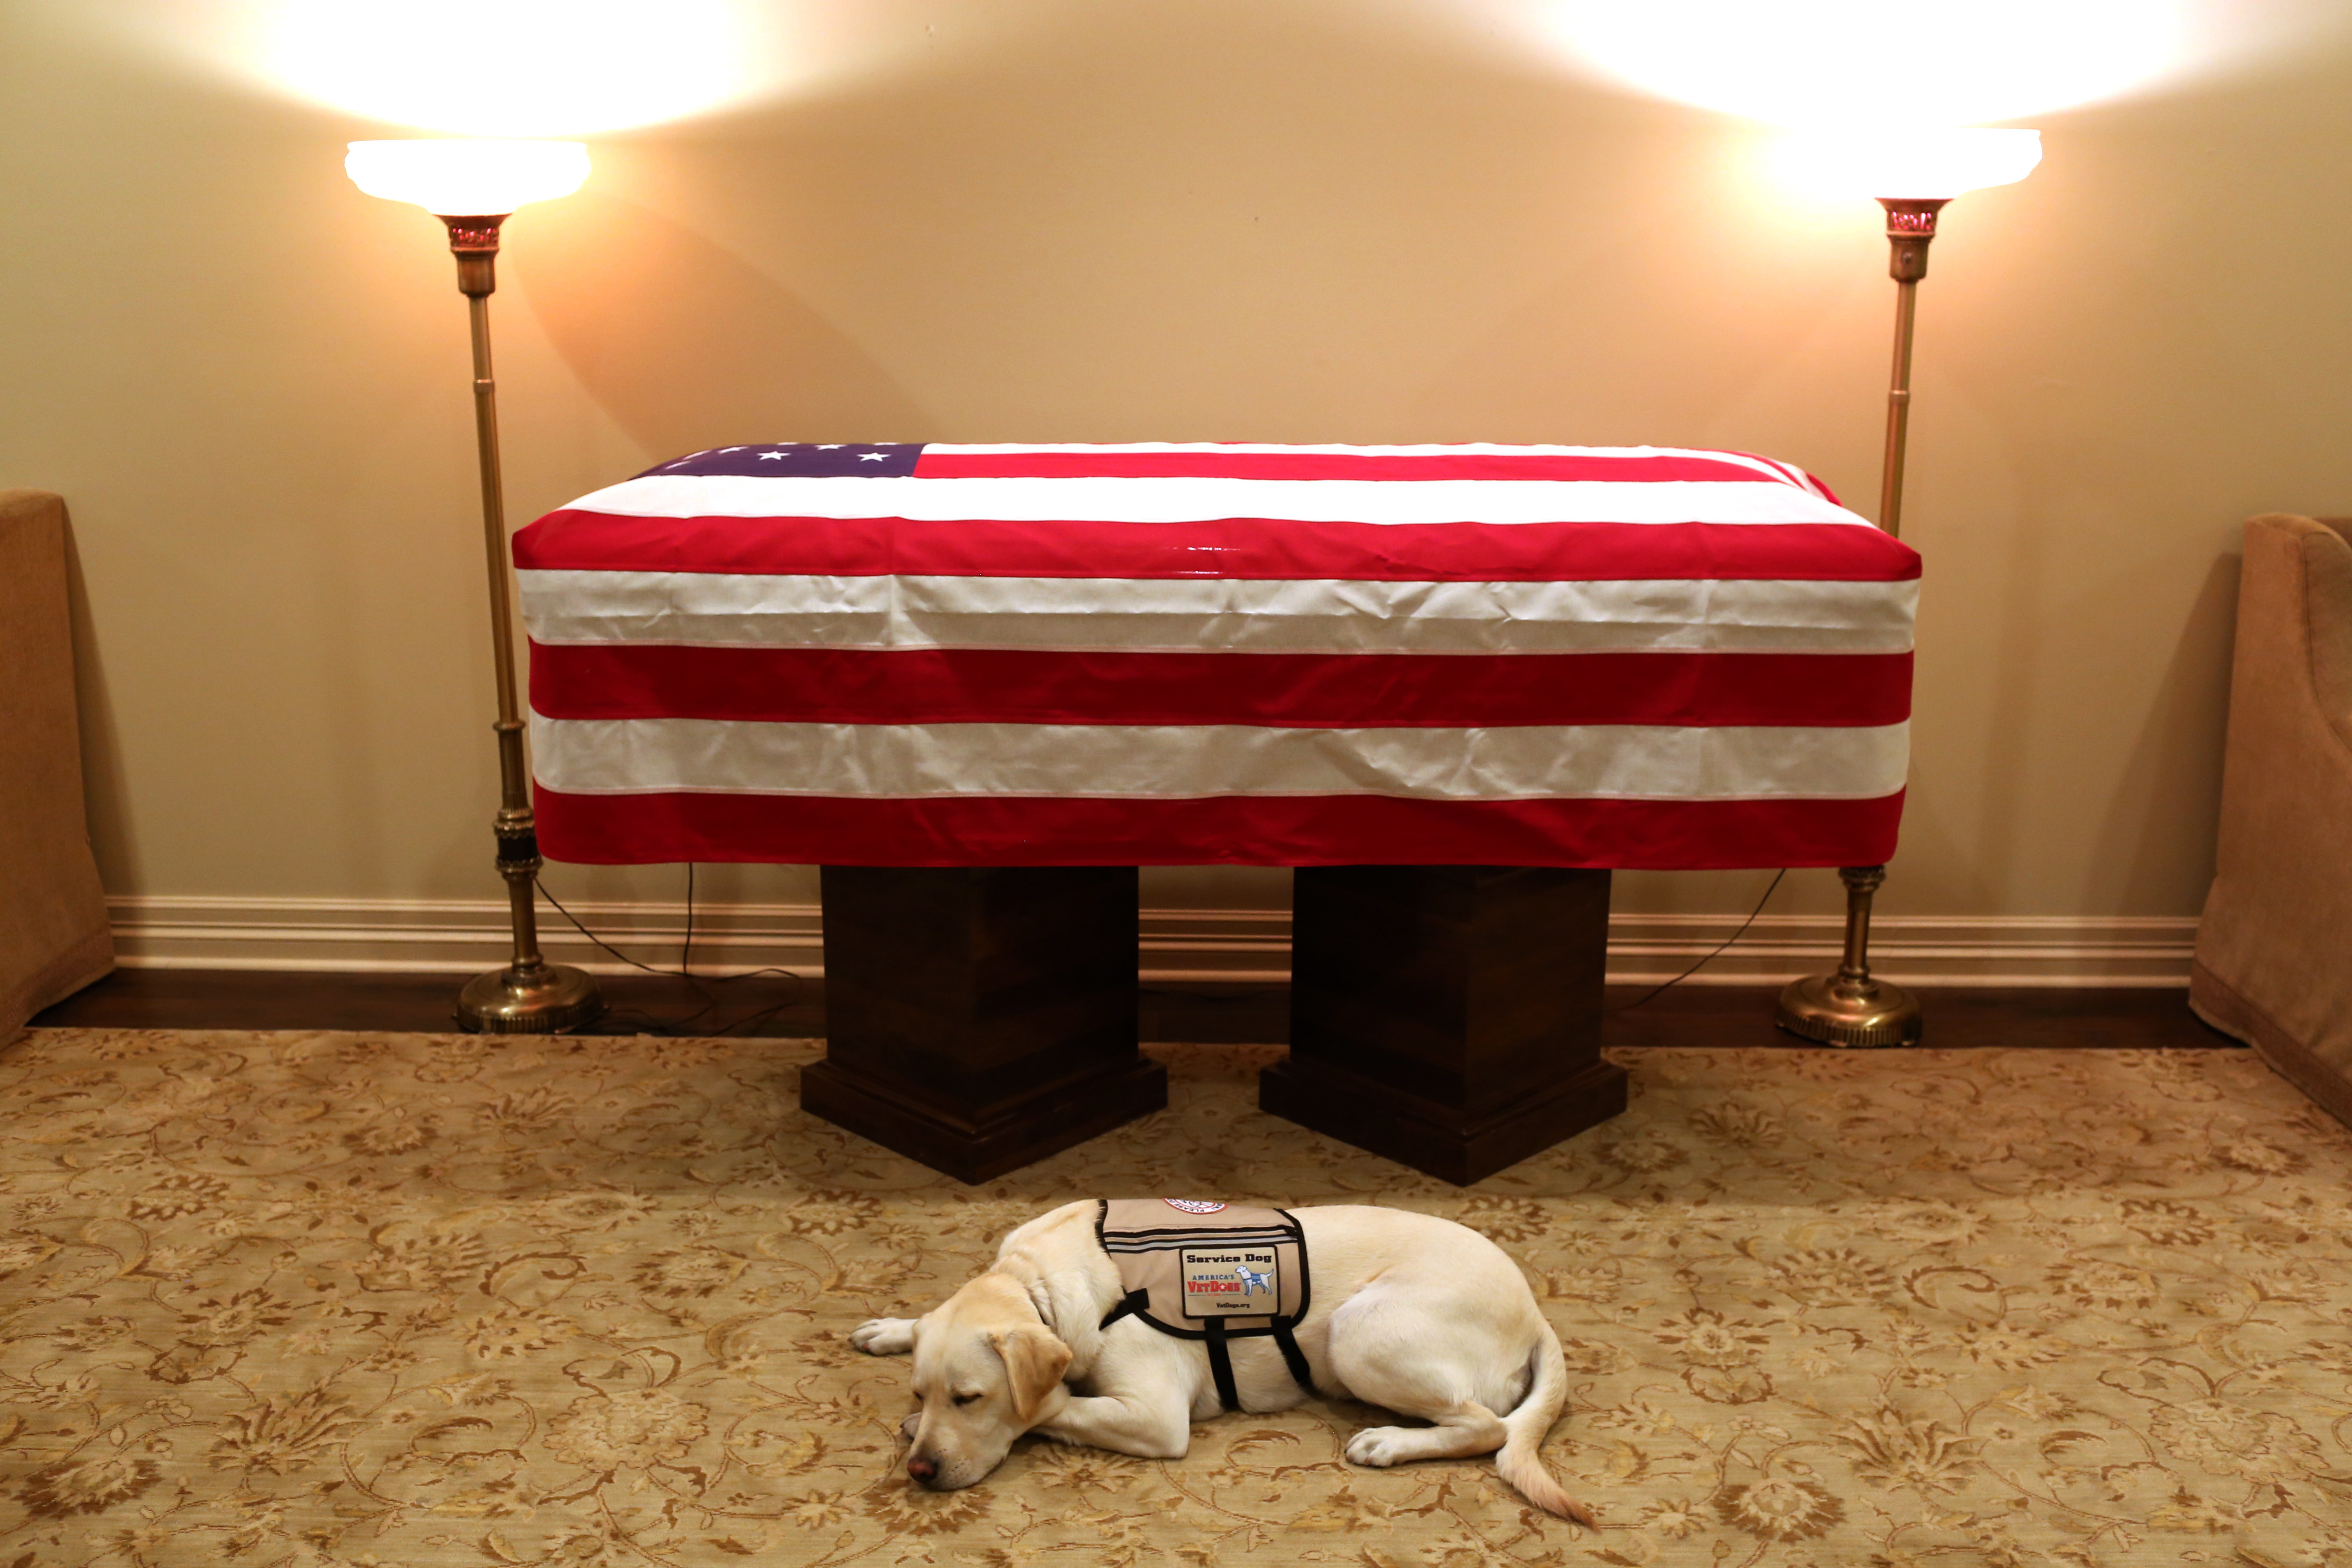 epa07205930 A handout photo dated 02 December 2018 and made available 03 December 2018 by the Office of George H. W. Bush, showing Sully, the golden labrador that worked as service dog for late US president George W.H. Bush, sleeping next to the president's coffin, Houston, Texas. Sully, that was named after US pilot Chesley 'Sully' Sullenberger that safely made an emergency landing at Hudson river in New York in 2009 and saved the lives of 155 people on the plane, was on early 2018 assigned to president Bush as as service dog.  EPA/OFFICE OF GEORGE H.W. BUSH / EVAN SISLEY / HANDOUT  HANDOUT EDITORIAL USE ONLY/NO SALES